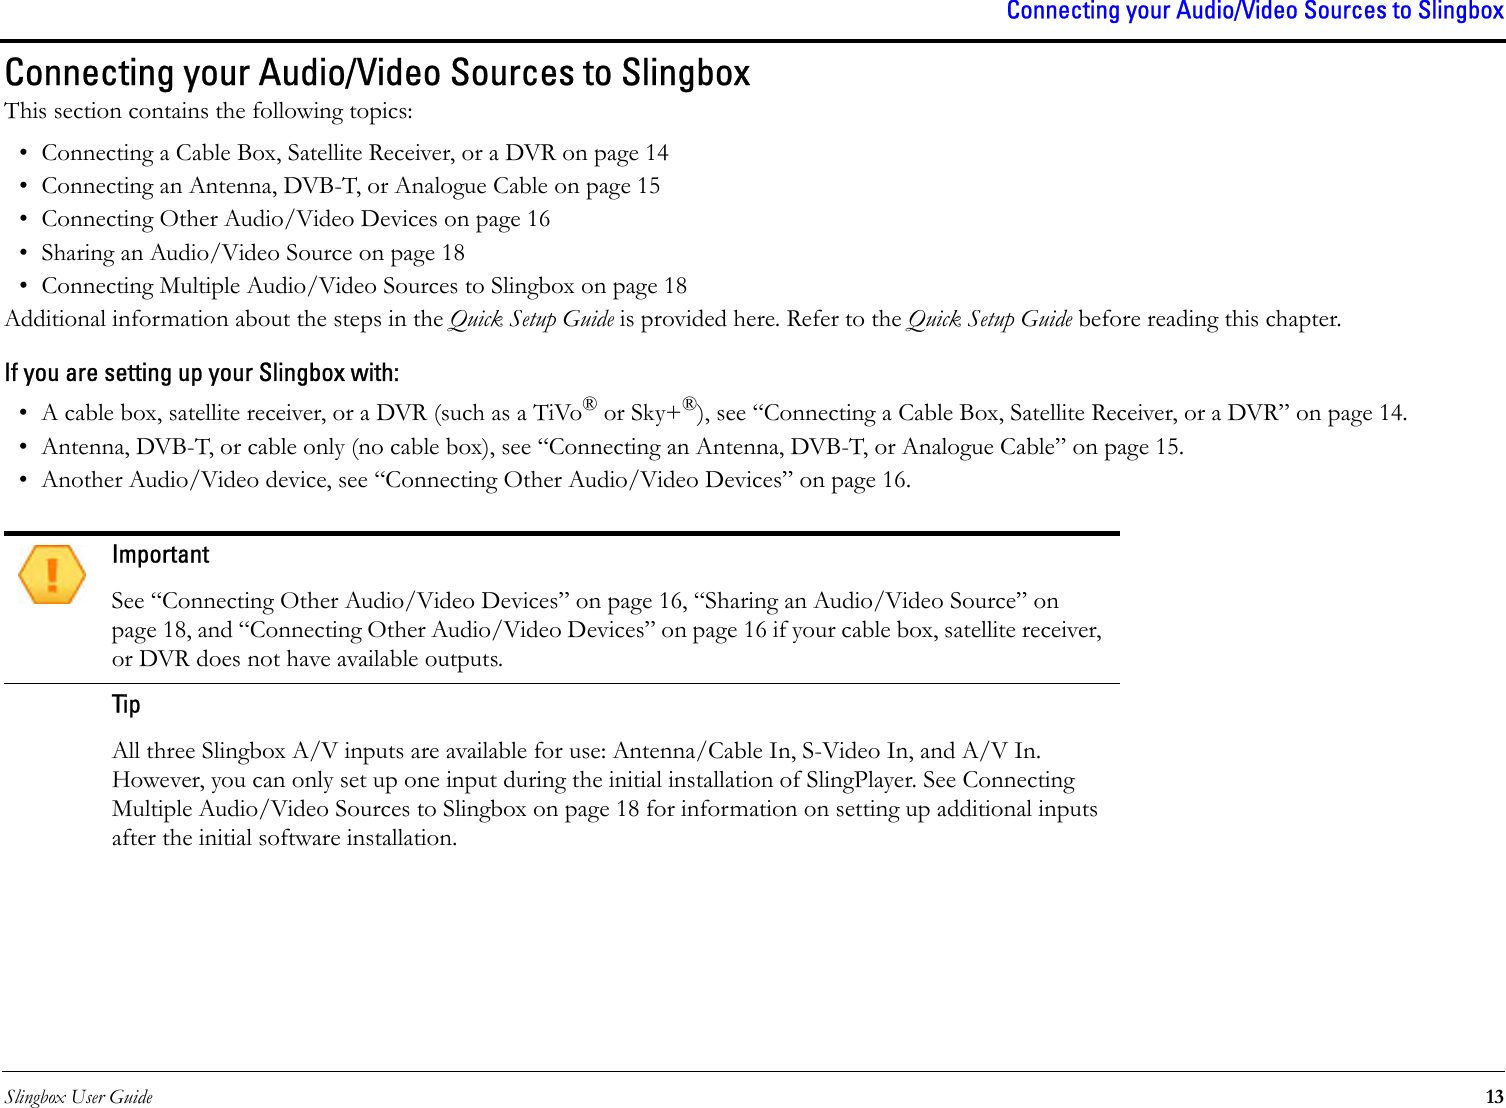 Slingbox User Guide 13Connecting your Audio/Video Sources to SlingboxConnecting your Audio/Video Sources to SlingboxThis section contains the following topics:• Connecting a Cable Box, Satellite Receiver, or a DVR on page 14• Connecting an Antenna, DVB-T, or Analogue Cable on page 15• Connecting Other Audio/Video Devices on page 16• Sharing an Audio/Video Source on page 18• Connecting Multiple Audio/Video Sources to Slingbox on page 18Additional information about the steps in the Quick Setup Guide is provided here. Refer to the Quick Setup Guide before reading this chapter.If you are setting up your Slingbox with:• A cable box, satellite receiver, or a DVR (such as a TiVo® or Sky+®), see “Connecting a Cable Box, Satellite Receiver, or a DVR” on page 14.• Antenna, DVB-T, or cable only (no cable box), see “Connecting an Antenna, DVB-T, or Analogue Cable” on page 15.• Another Audio/Video device, see “Connecting Other Audio/Video Devices” on page 16.ImportantSee “Connecting Other Audio/Video Devices” on page 16, “Sharing an Audio/Video Source” on page 18, and “Connecting Other Audio/Video Devices” on page 16 if your cable box, satellite receiver, or DVR does not have available outputs.Tip All three Slingbox A/V inputs are available for use: Antenna/Cable In, S-Video In, and A/V In. However, you can only set up one input during the initial installation of SlingPlayer. See Connecting Multiple Audio/Video Sources to Slingbox on page 18 for information on setting up additional inputs after the initial software installation.